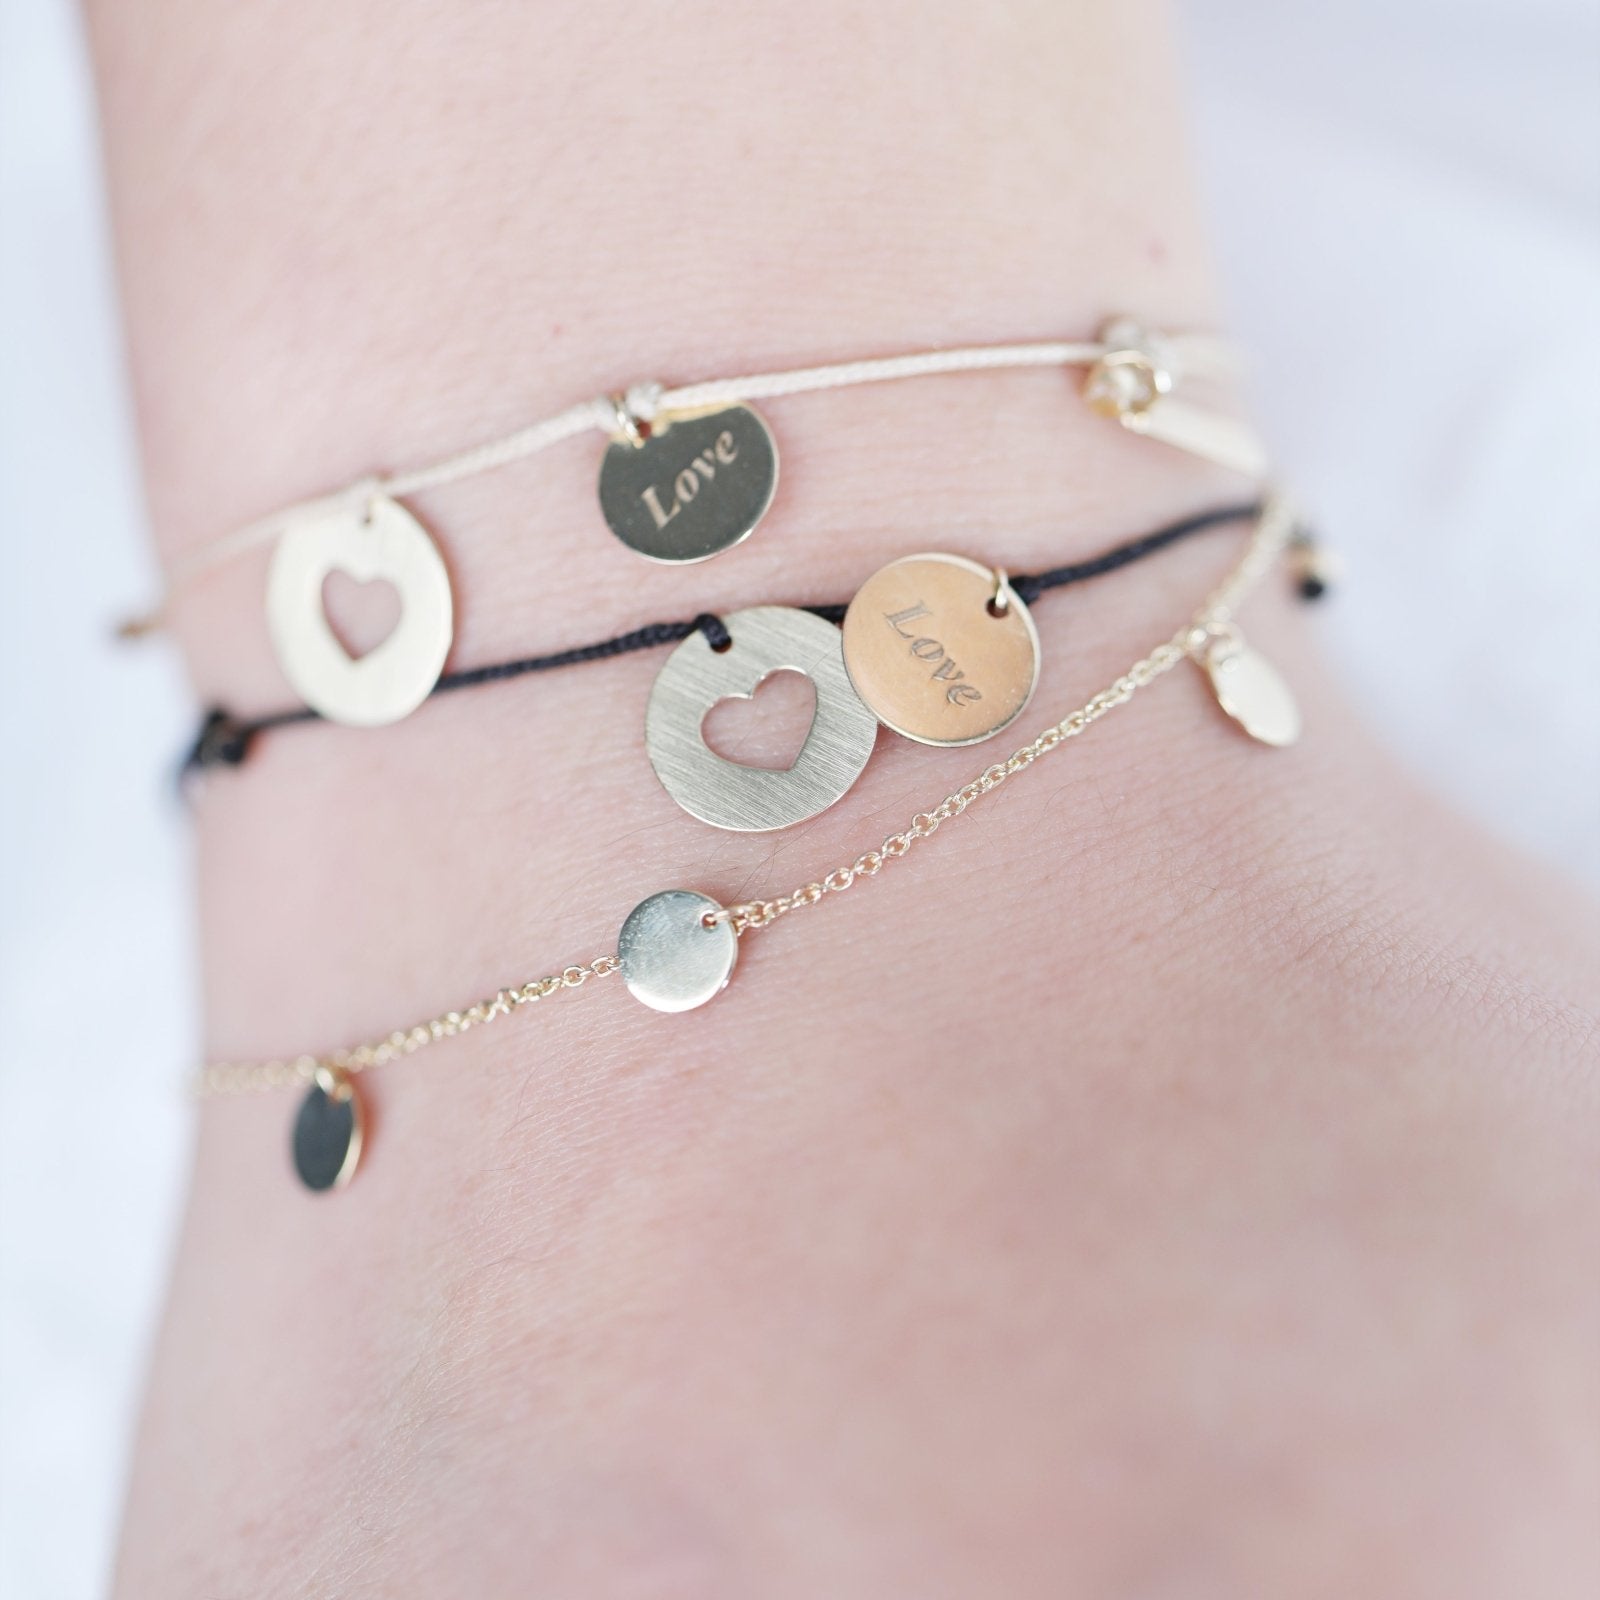 Love Charm Bracelet in Solid Yellow Gold Bracelets Estella Collection #product_description# 17660 10k Personalized Jewelry Ready to Ship #tag4# #tag5# #tag6# #tag7# #tag8# #tag9# #tag10#